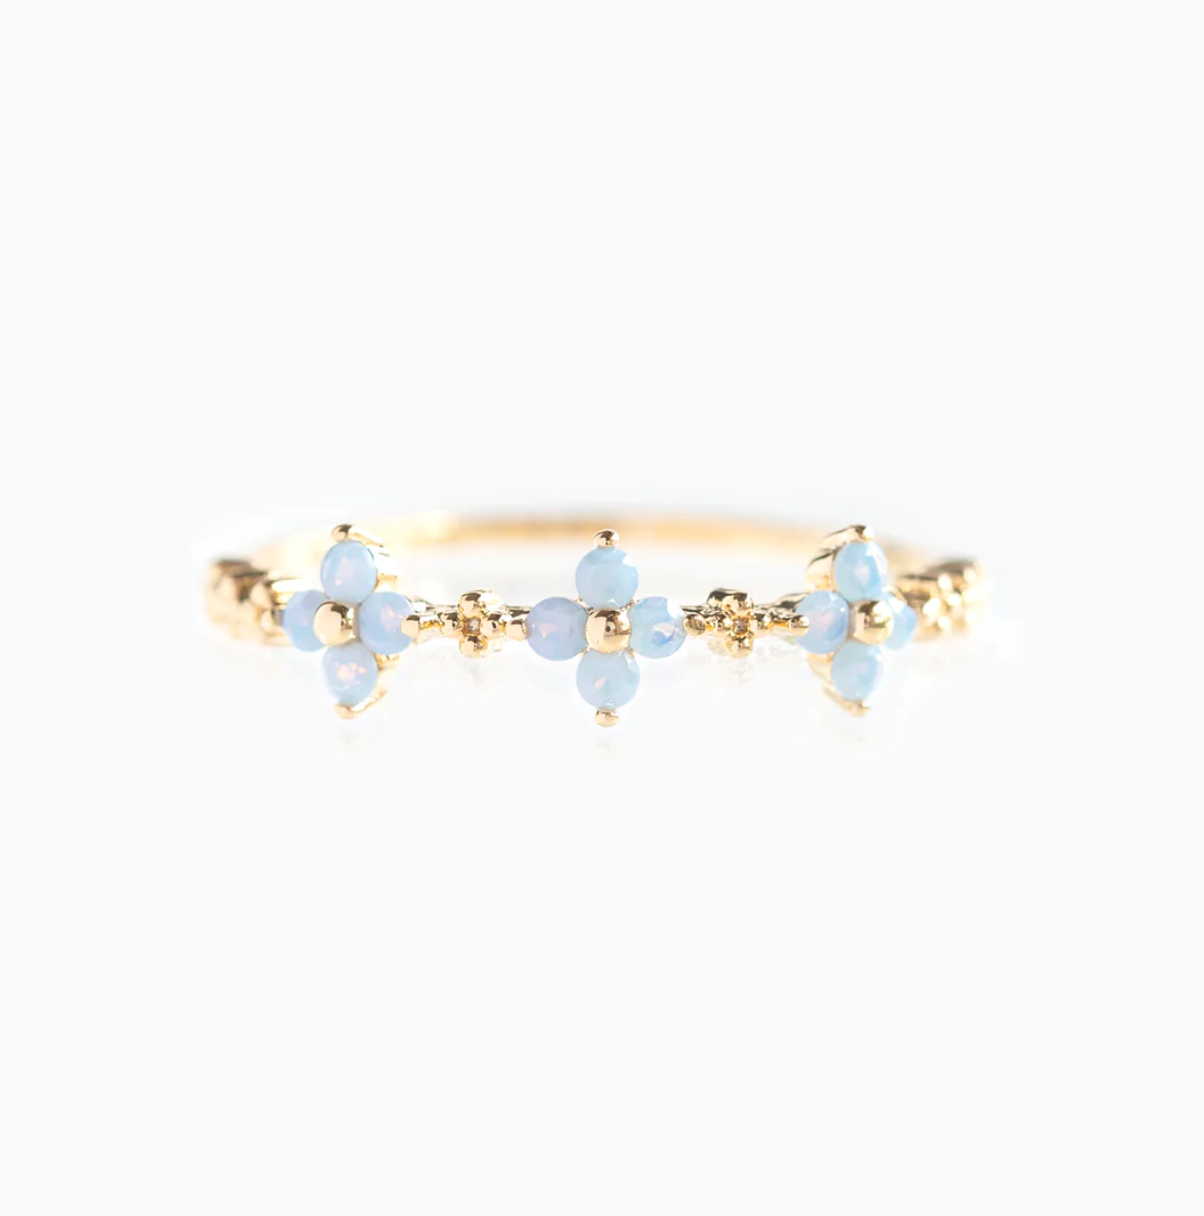 Blue Blossom Ring by Girls Crew